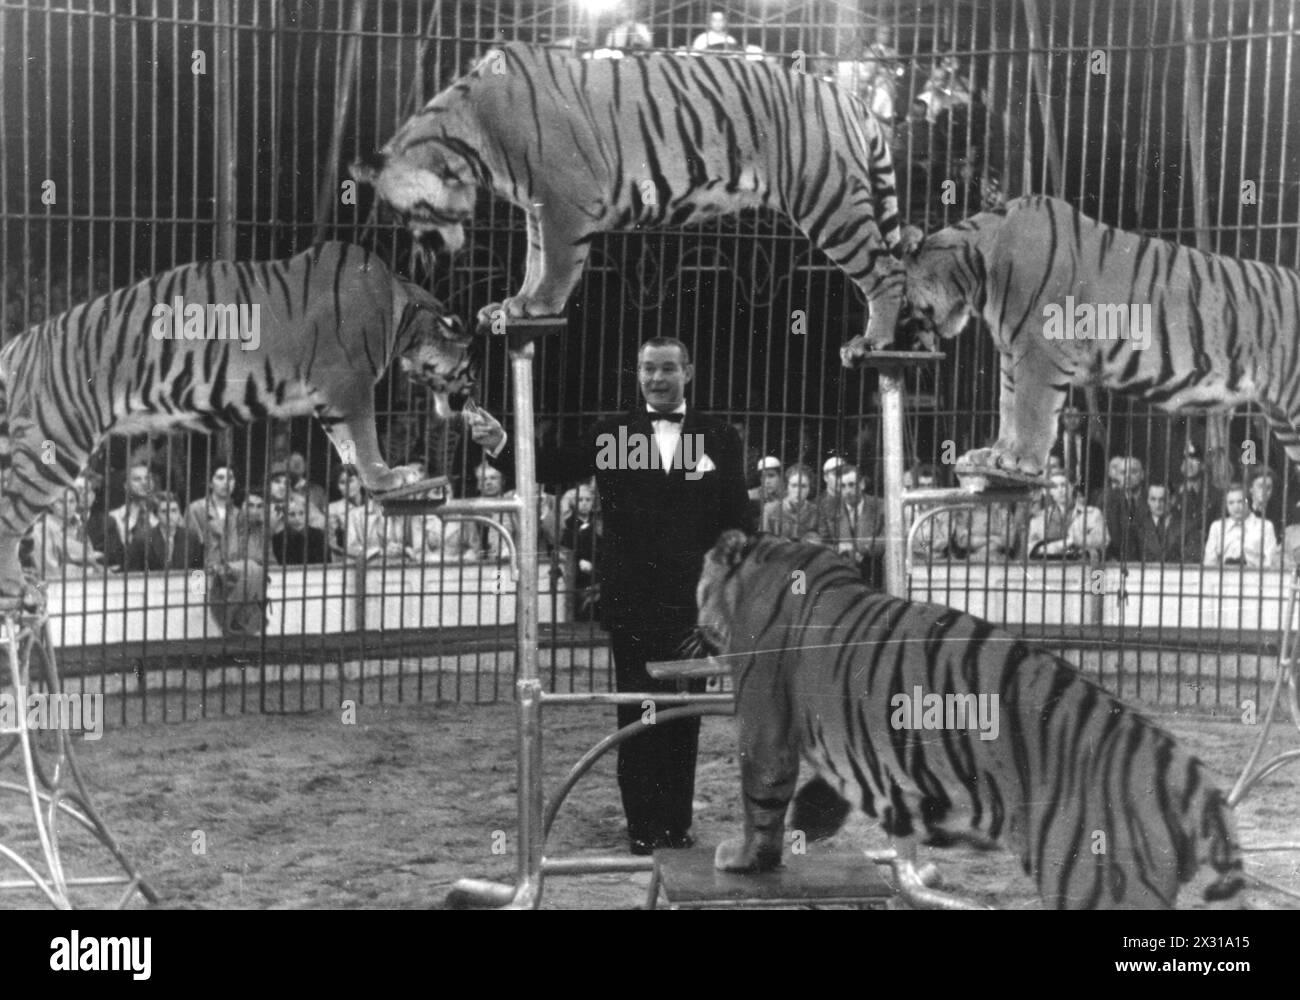 Sembach, Carl, 8.12.1908 - 18.1.1984, German ringmaster of the circus Krone, ADDITIONAL-RIGHTS-CLEARANCE-INFO-NOT-AVAILABLE Stock Photo